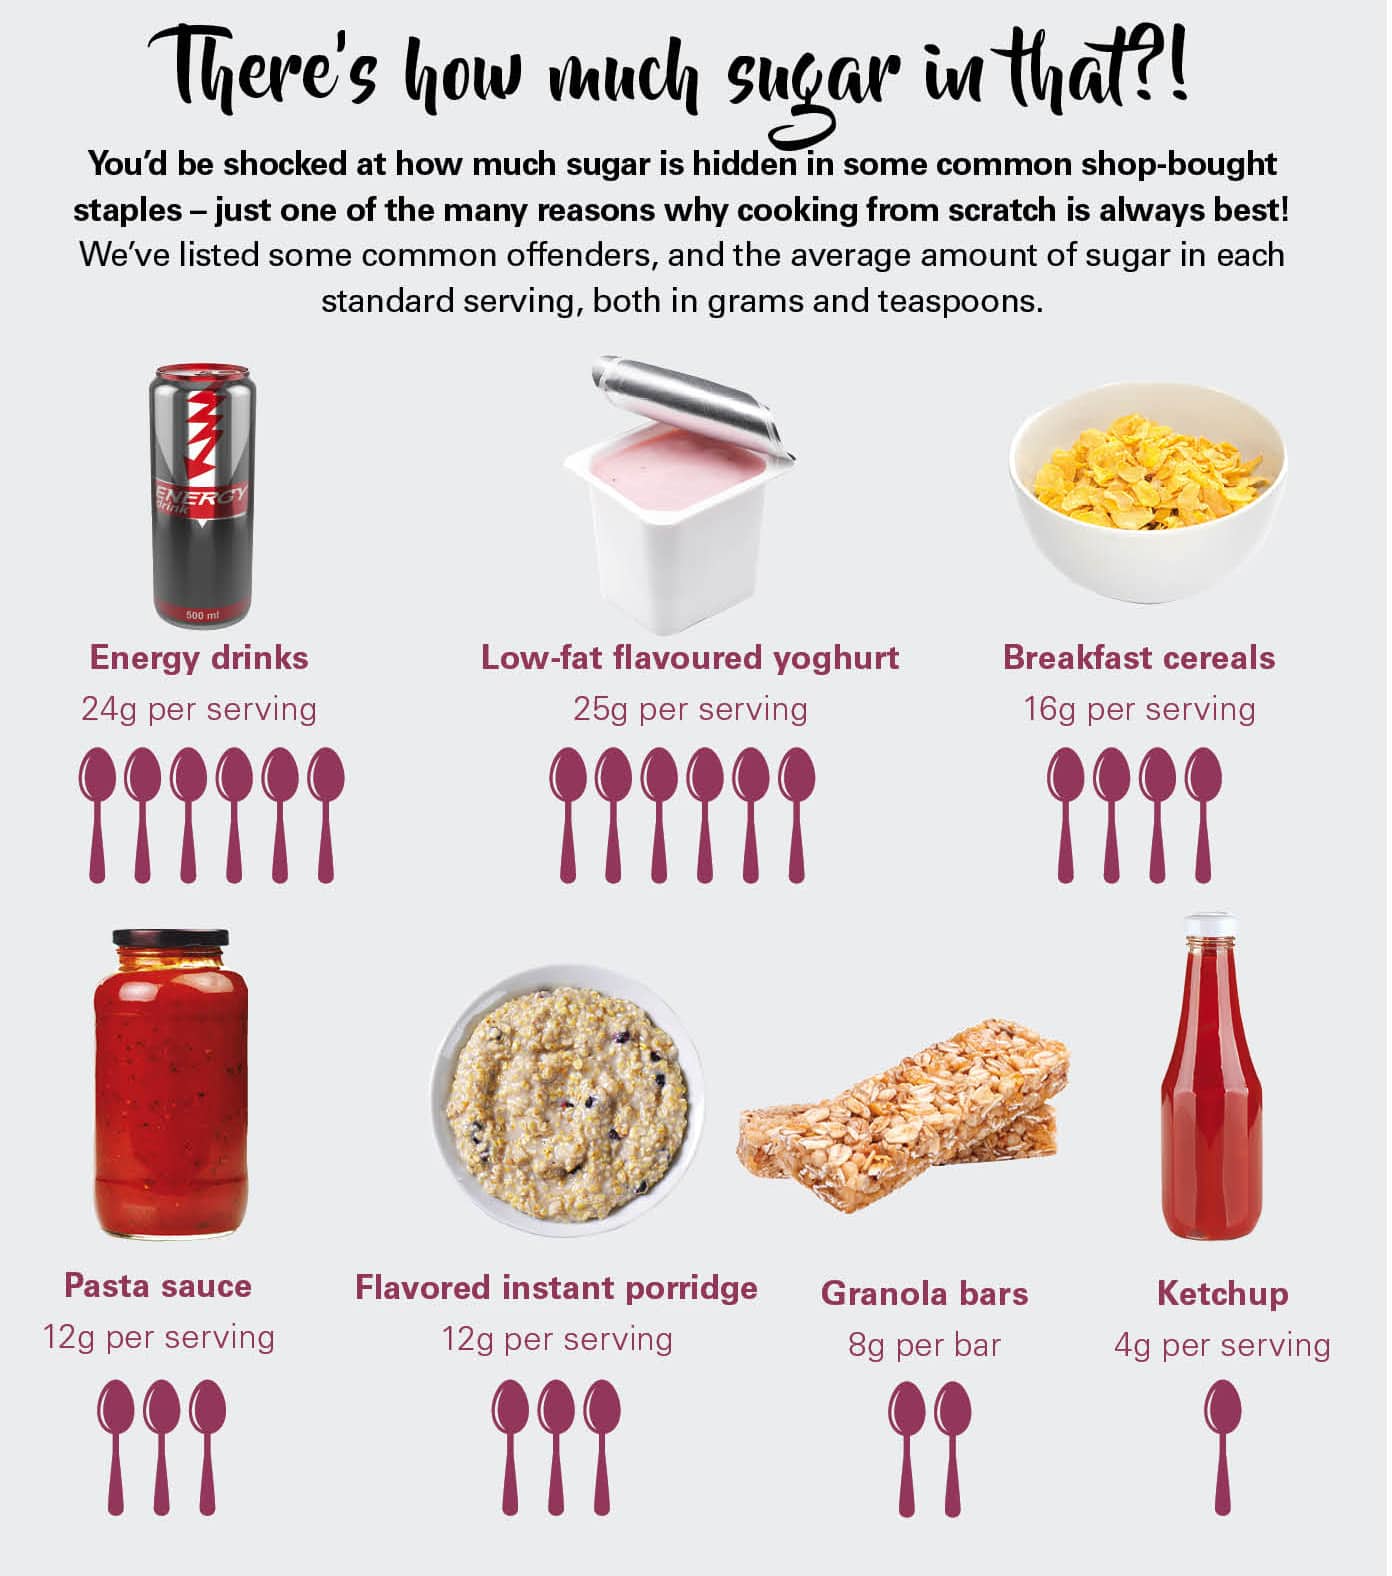 The simple guide to understanding sugar